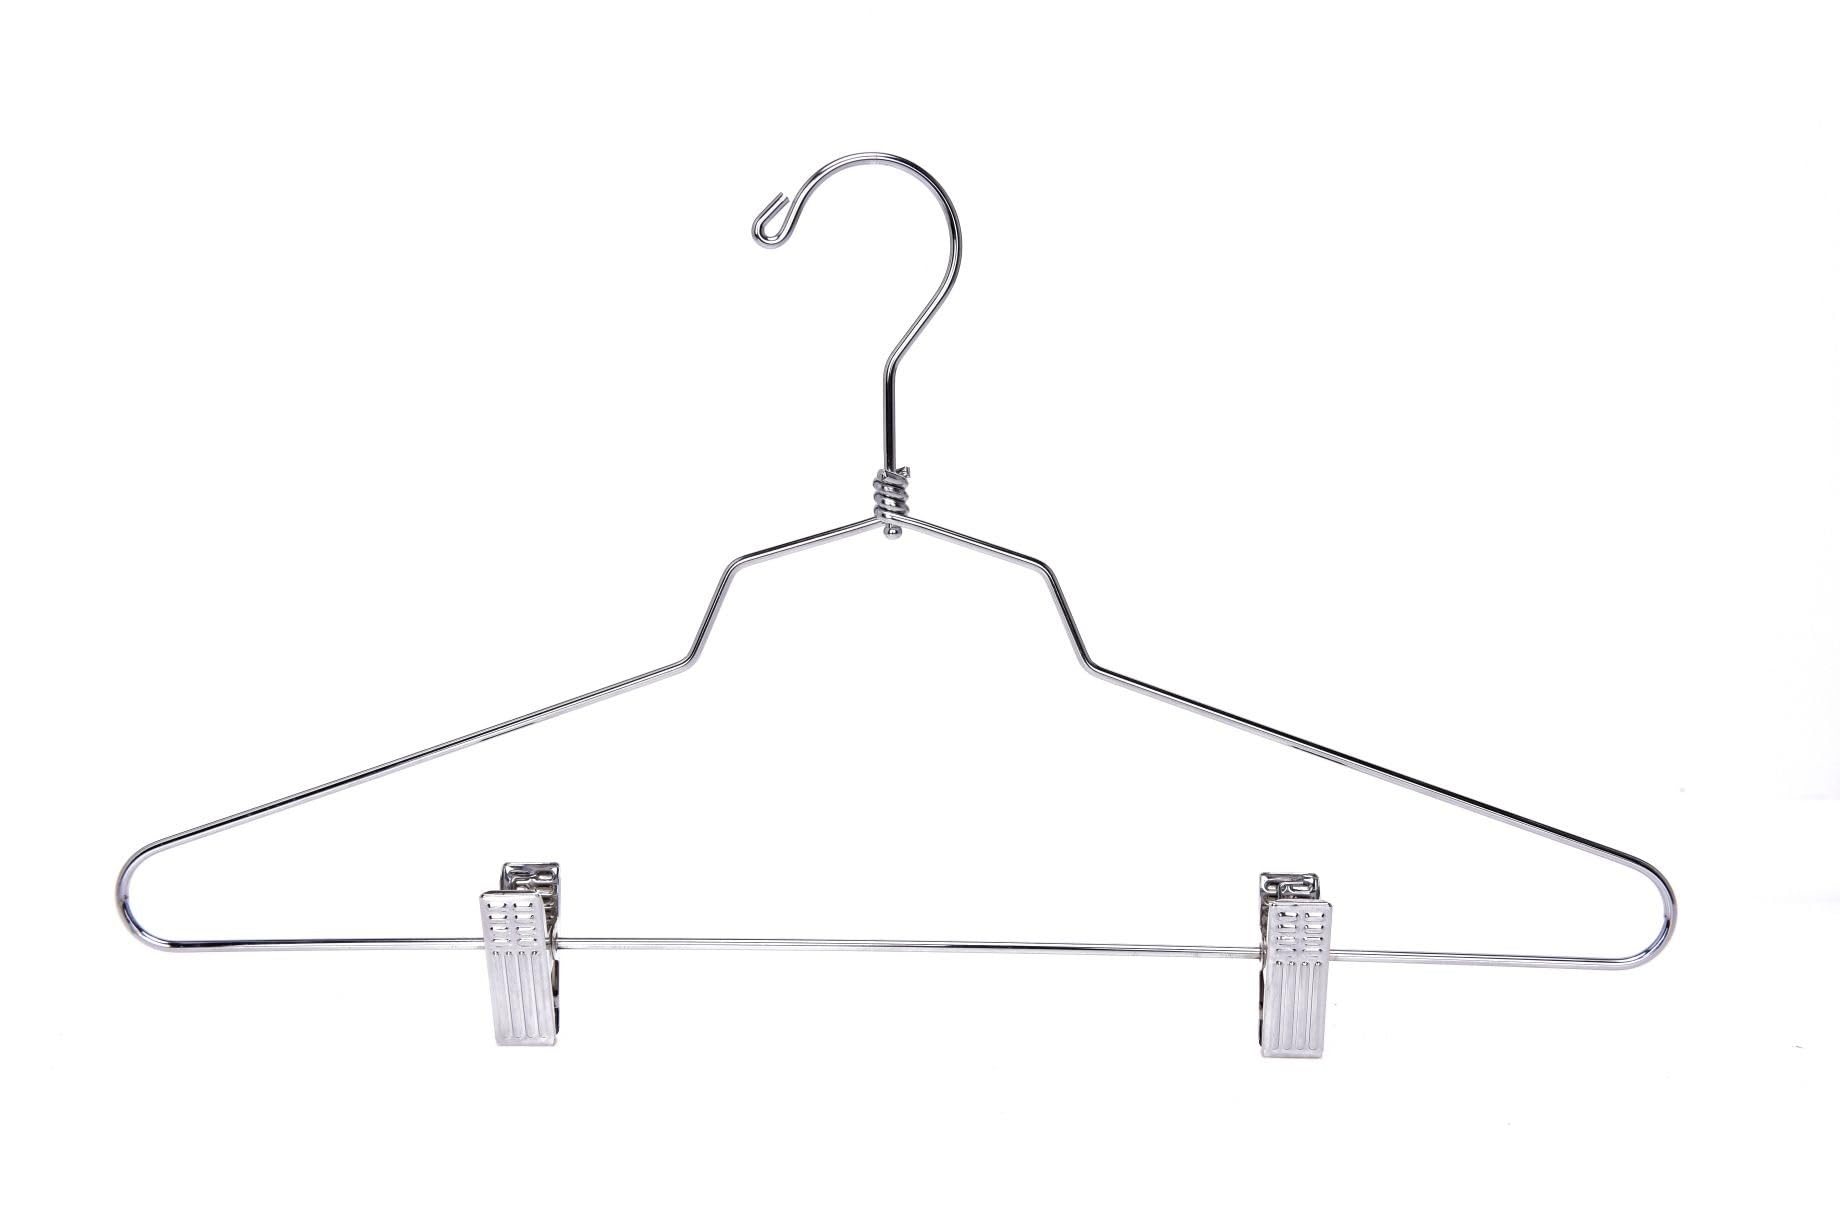 Quality Hangers Metal Skirt Hangers with Clips Multi Pack - Wire Pants Hangers with Swivel Hook - Heavy Duty Hangers for Jeans with Adjustable Metallic Clips - Ideal Clothing Hangers  - Like New